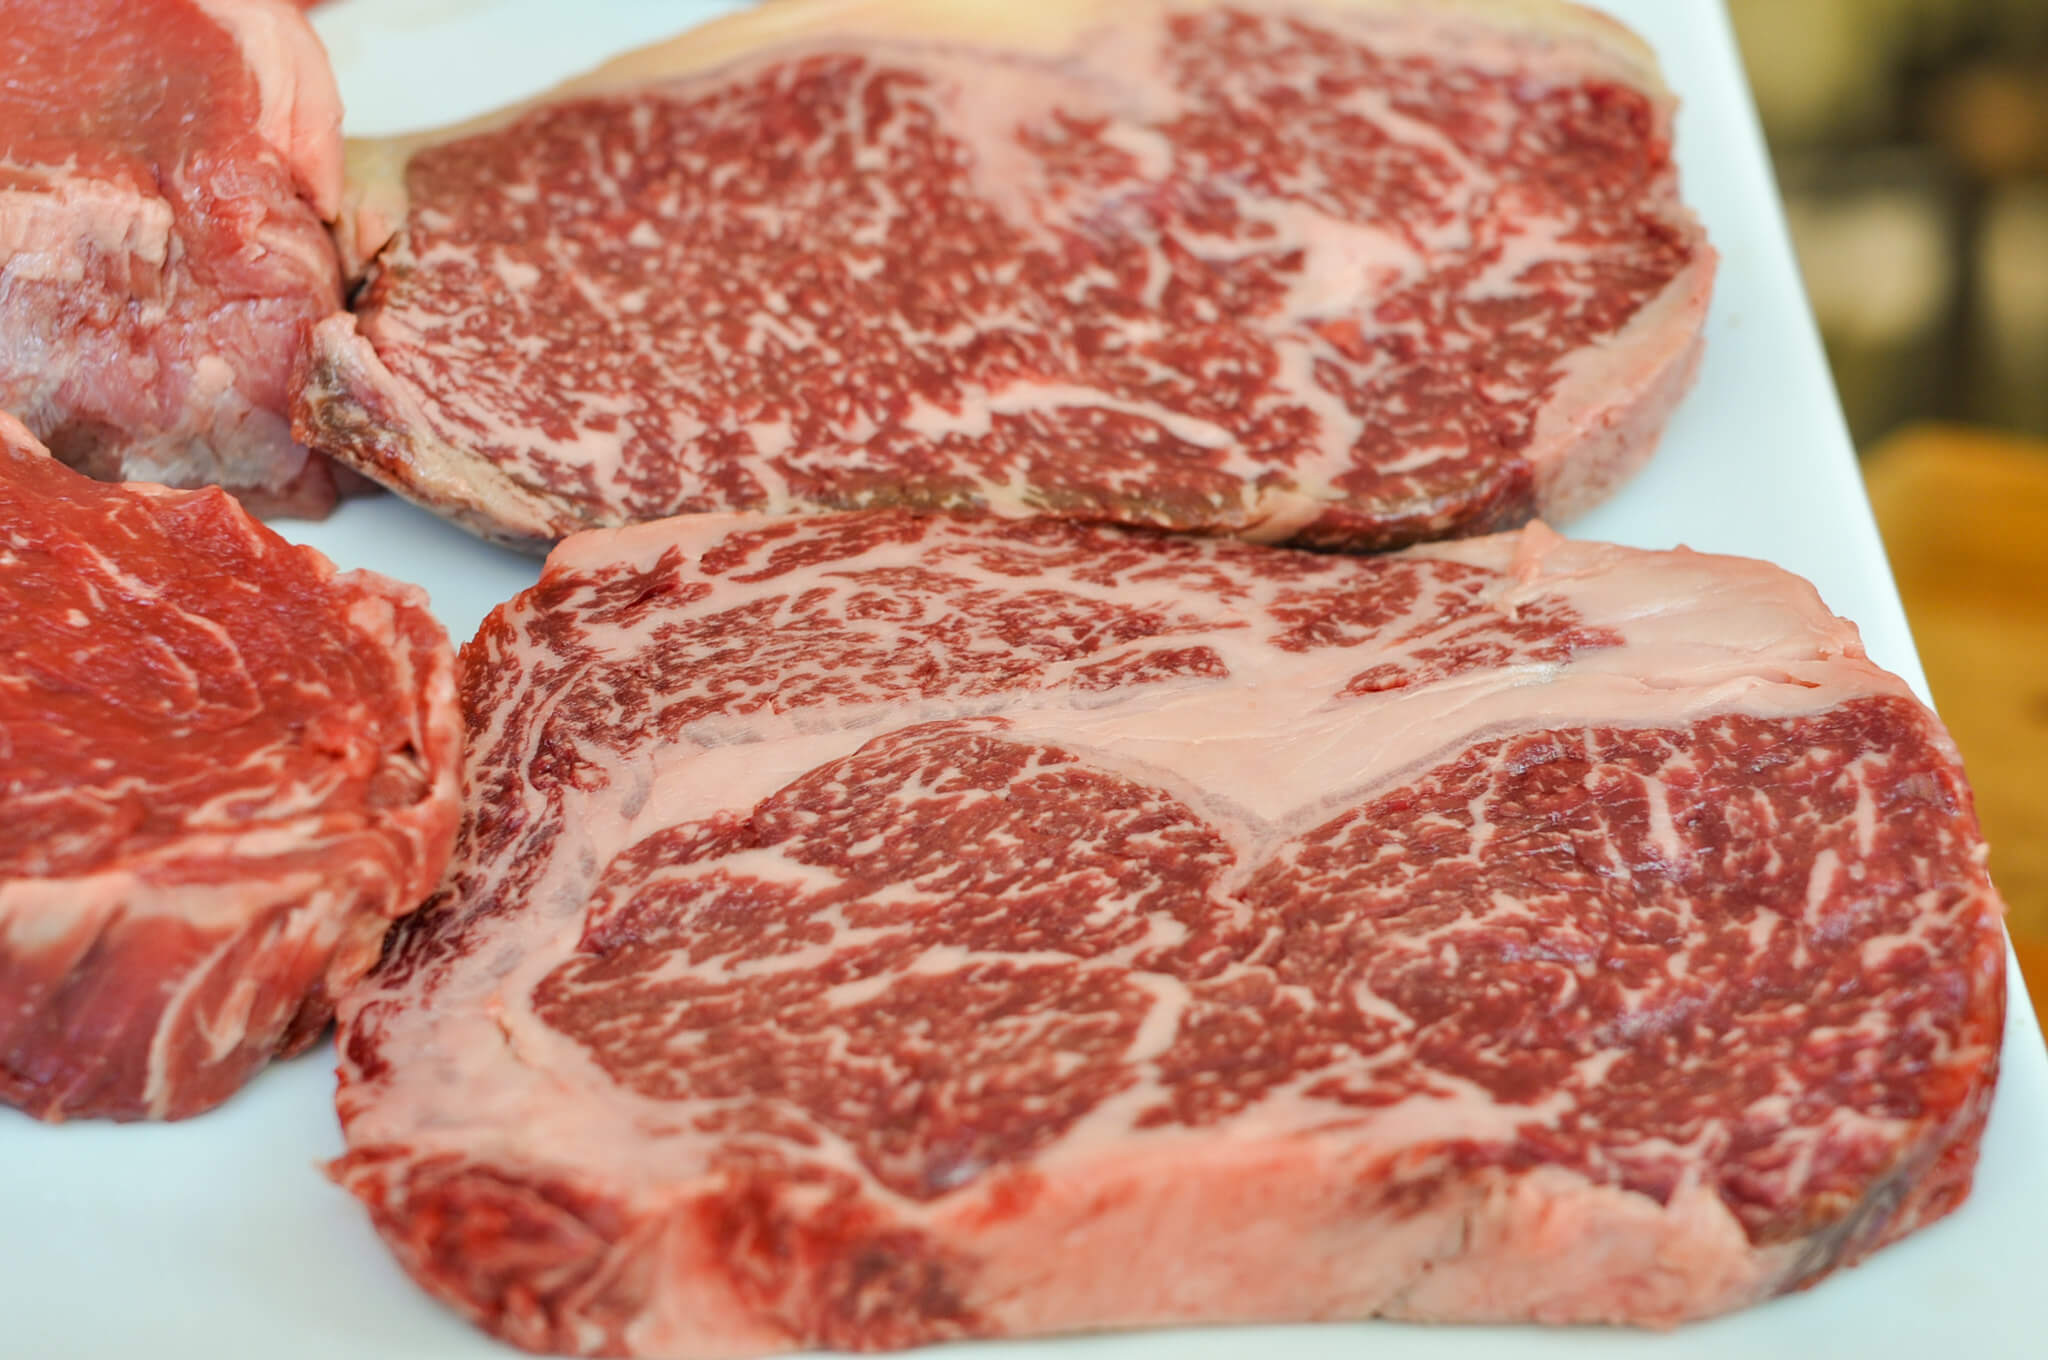 How Expensive Is Wagyu Steak?